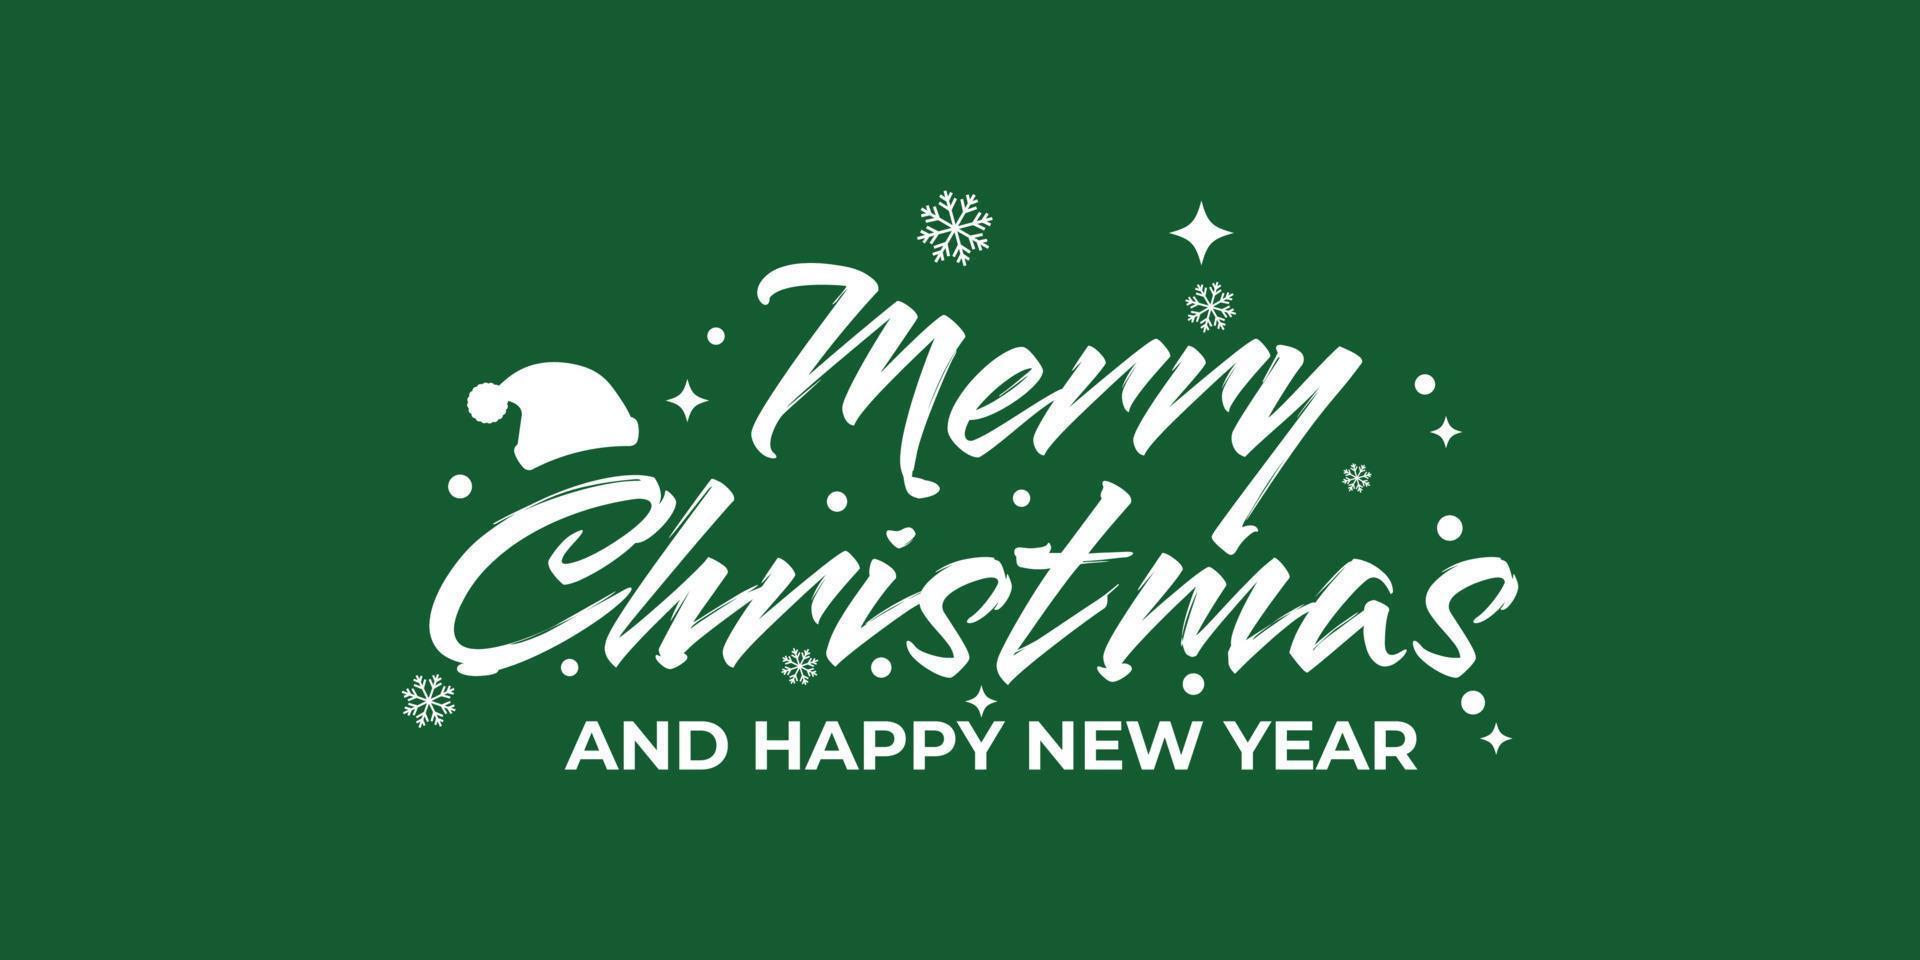 Merry Christmas and Happy New Year Greeting Card, lettering, vector illustration. Free Vector